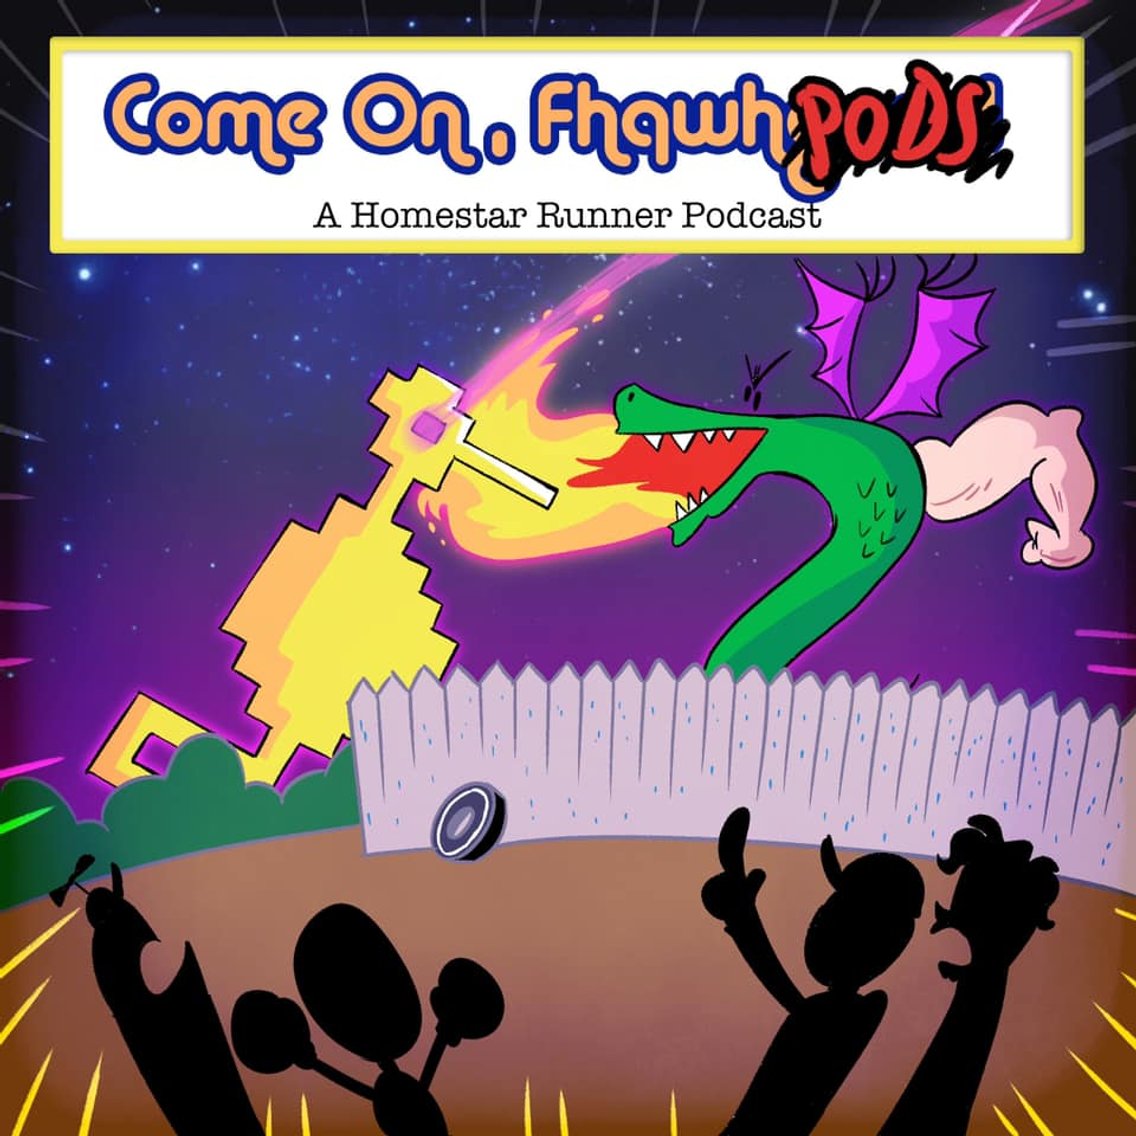 Come On, Fhqwhpods! - A Homestar Runner Podcast - Cover Image